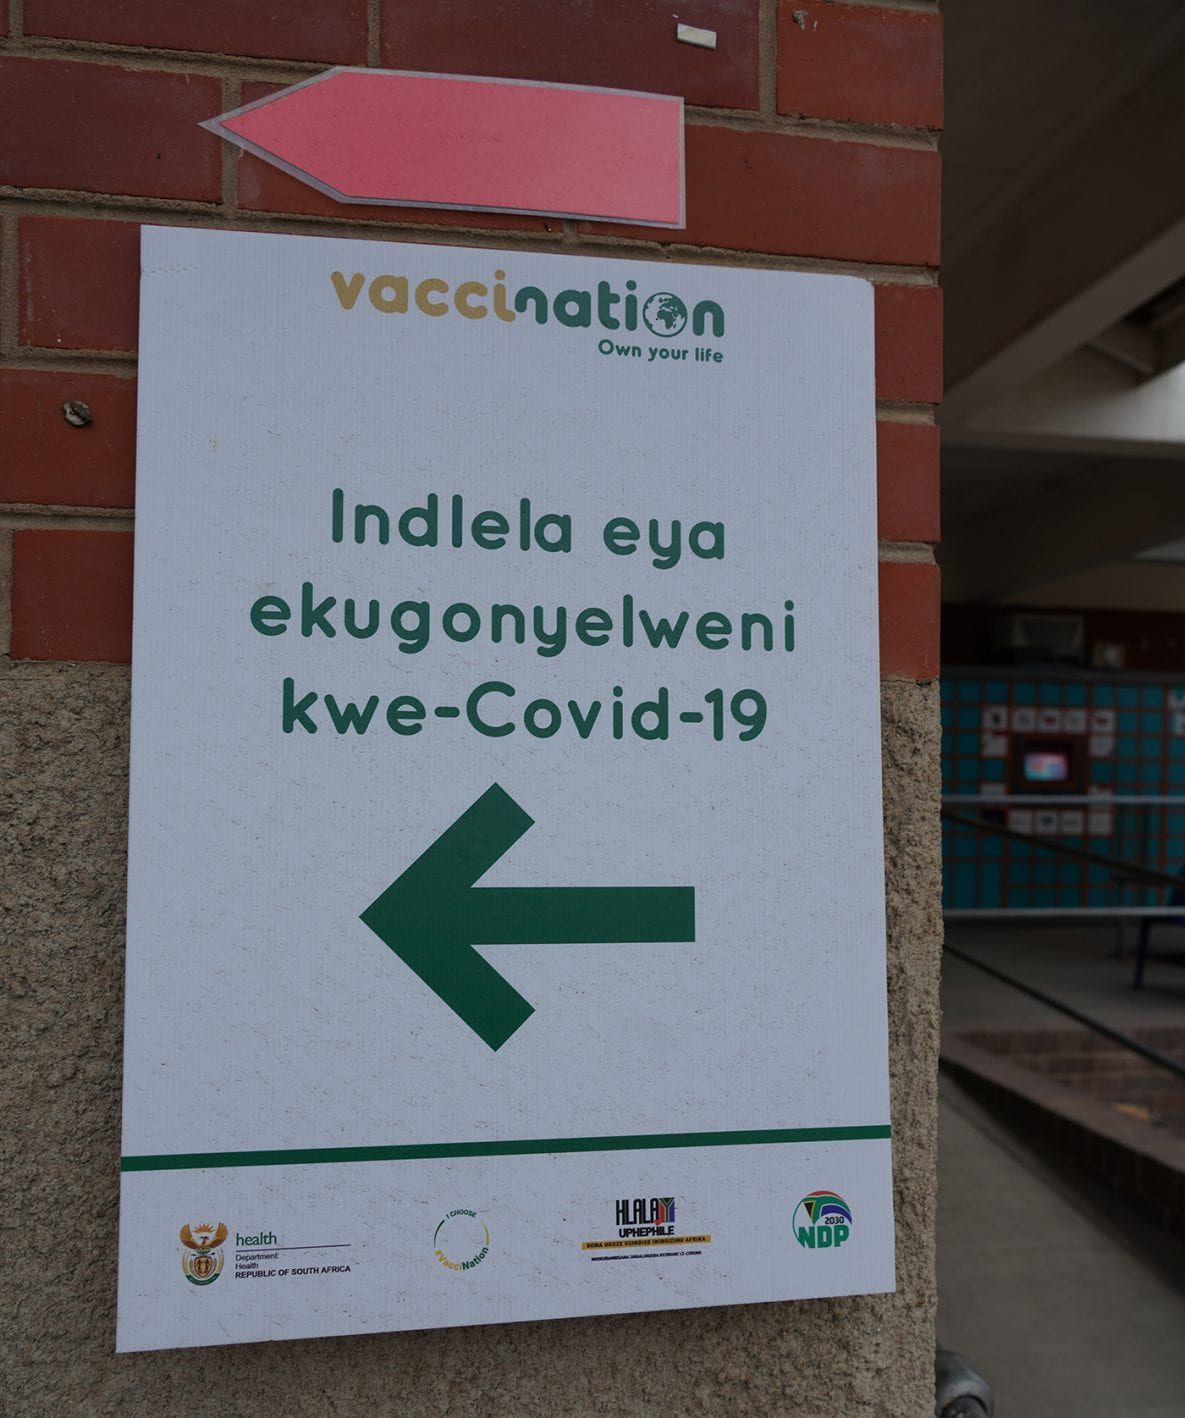 Photo of a sign showing where people in South Africa could get a COVID-19 vaccine.